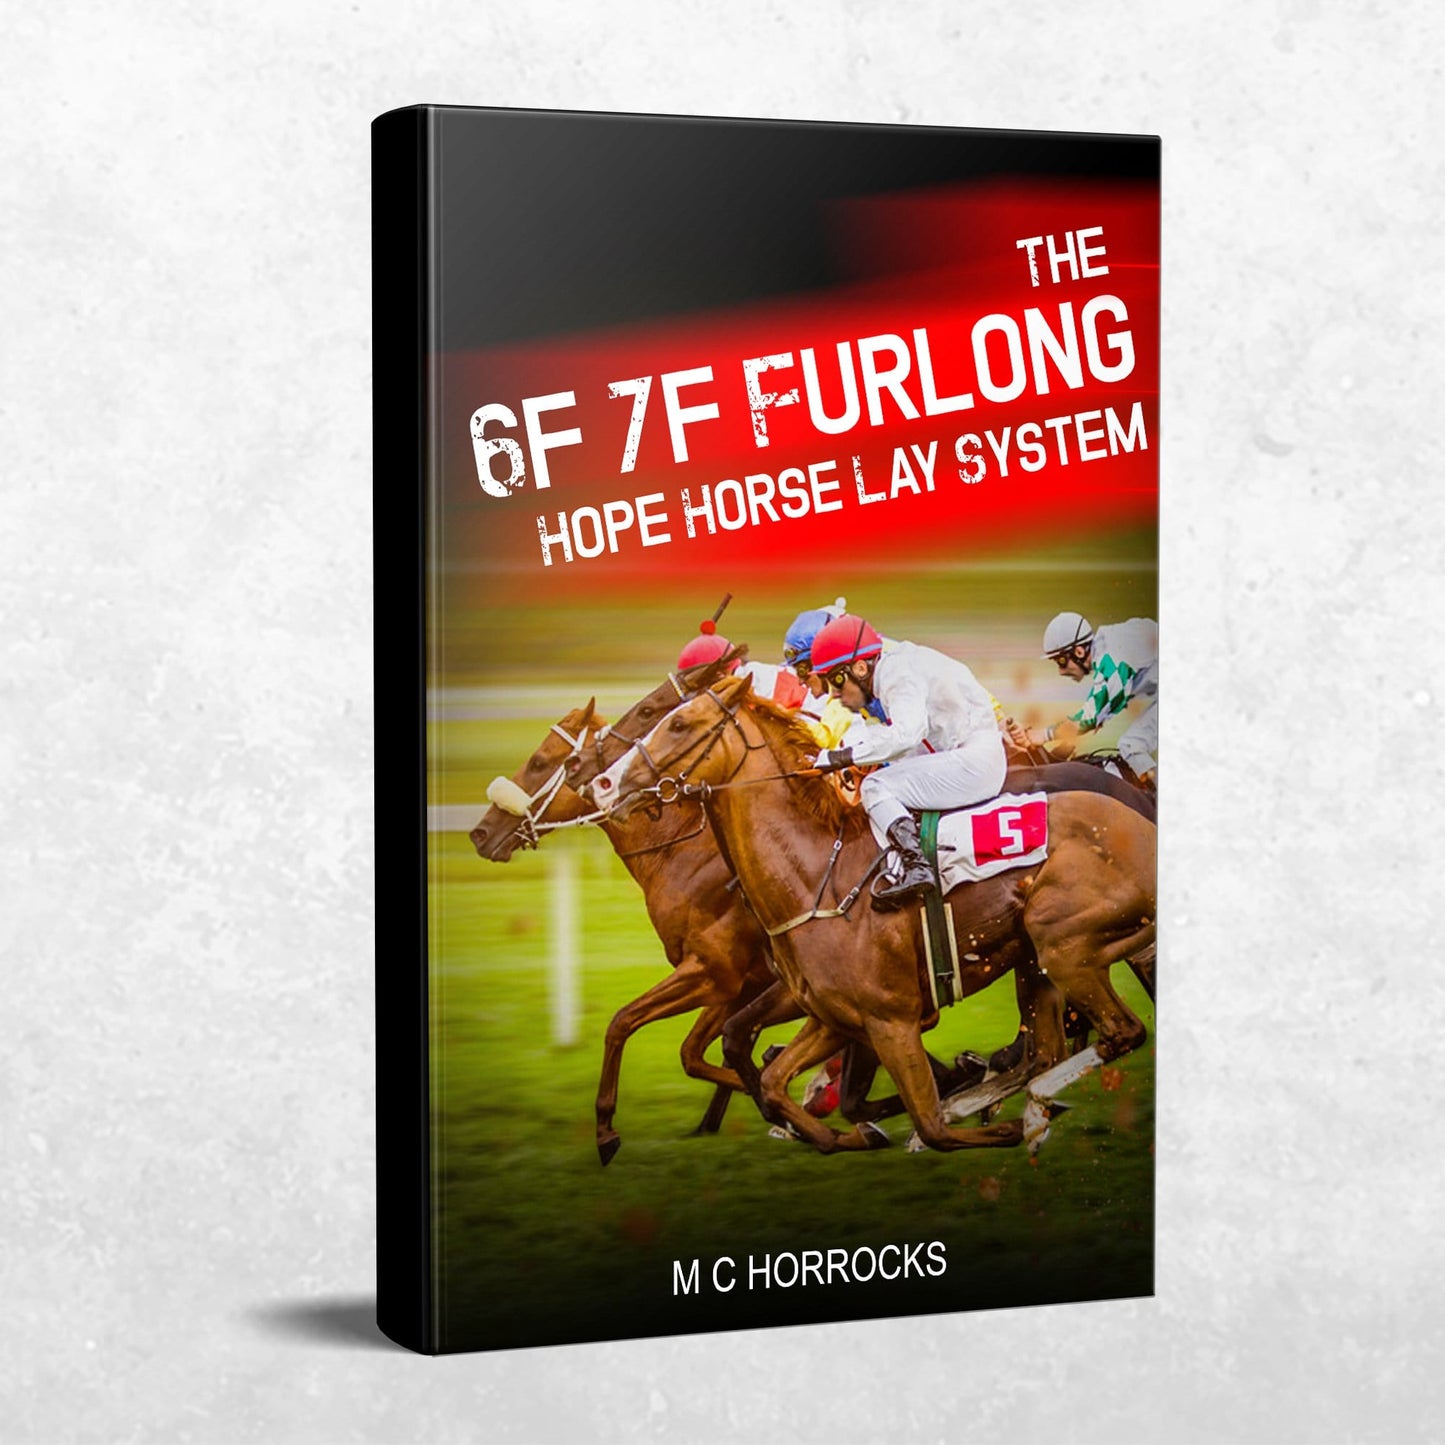 The 6f 7f Furlong Hope Horse Betting Lay System : Laying Horses For A Living